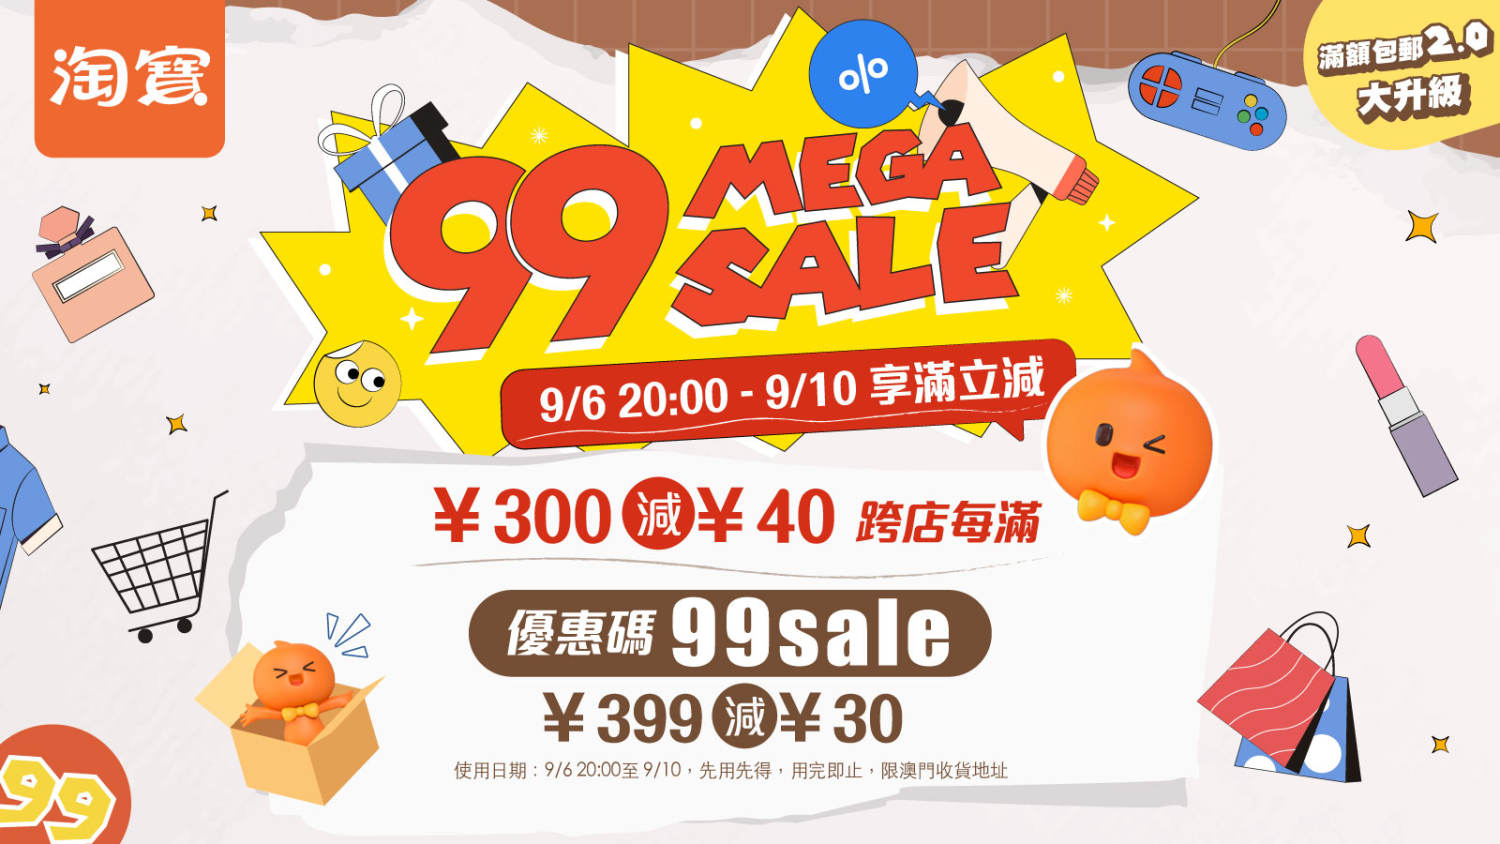 (*The offer is subject to the terms and conditions, please refer to the Taobao Tmall China Macau Station event page for details)